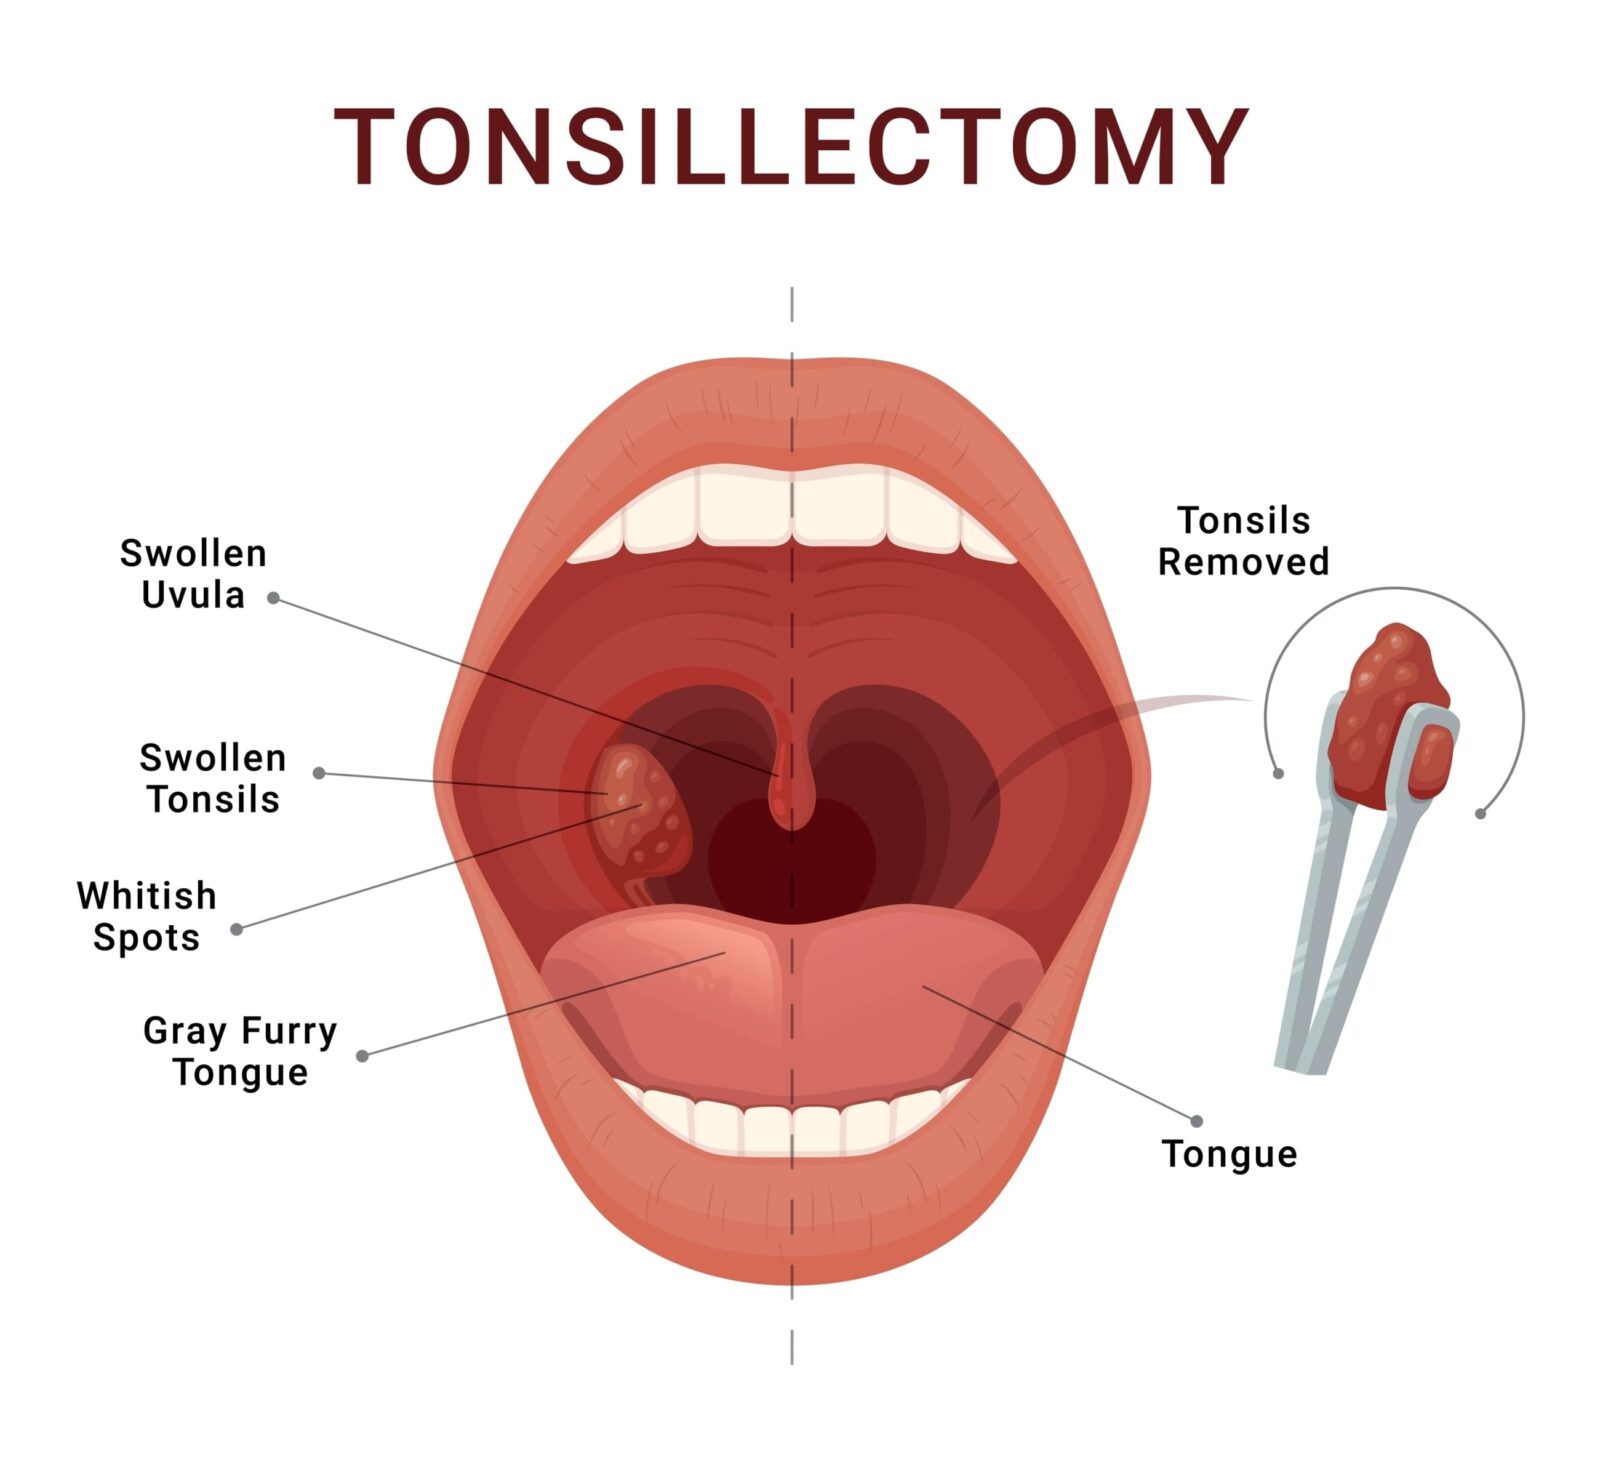 Tonsillectomy scheme removal of palatine tonsils acute pharyngitis vector isometric illustration. Open human mouth inflammation bacterial disease adenoids infection breath blockage medical infographic
